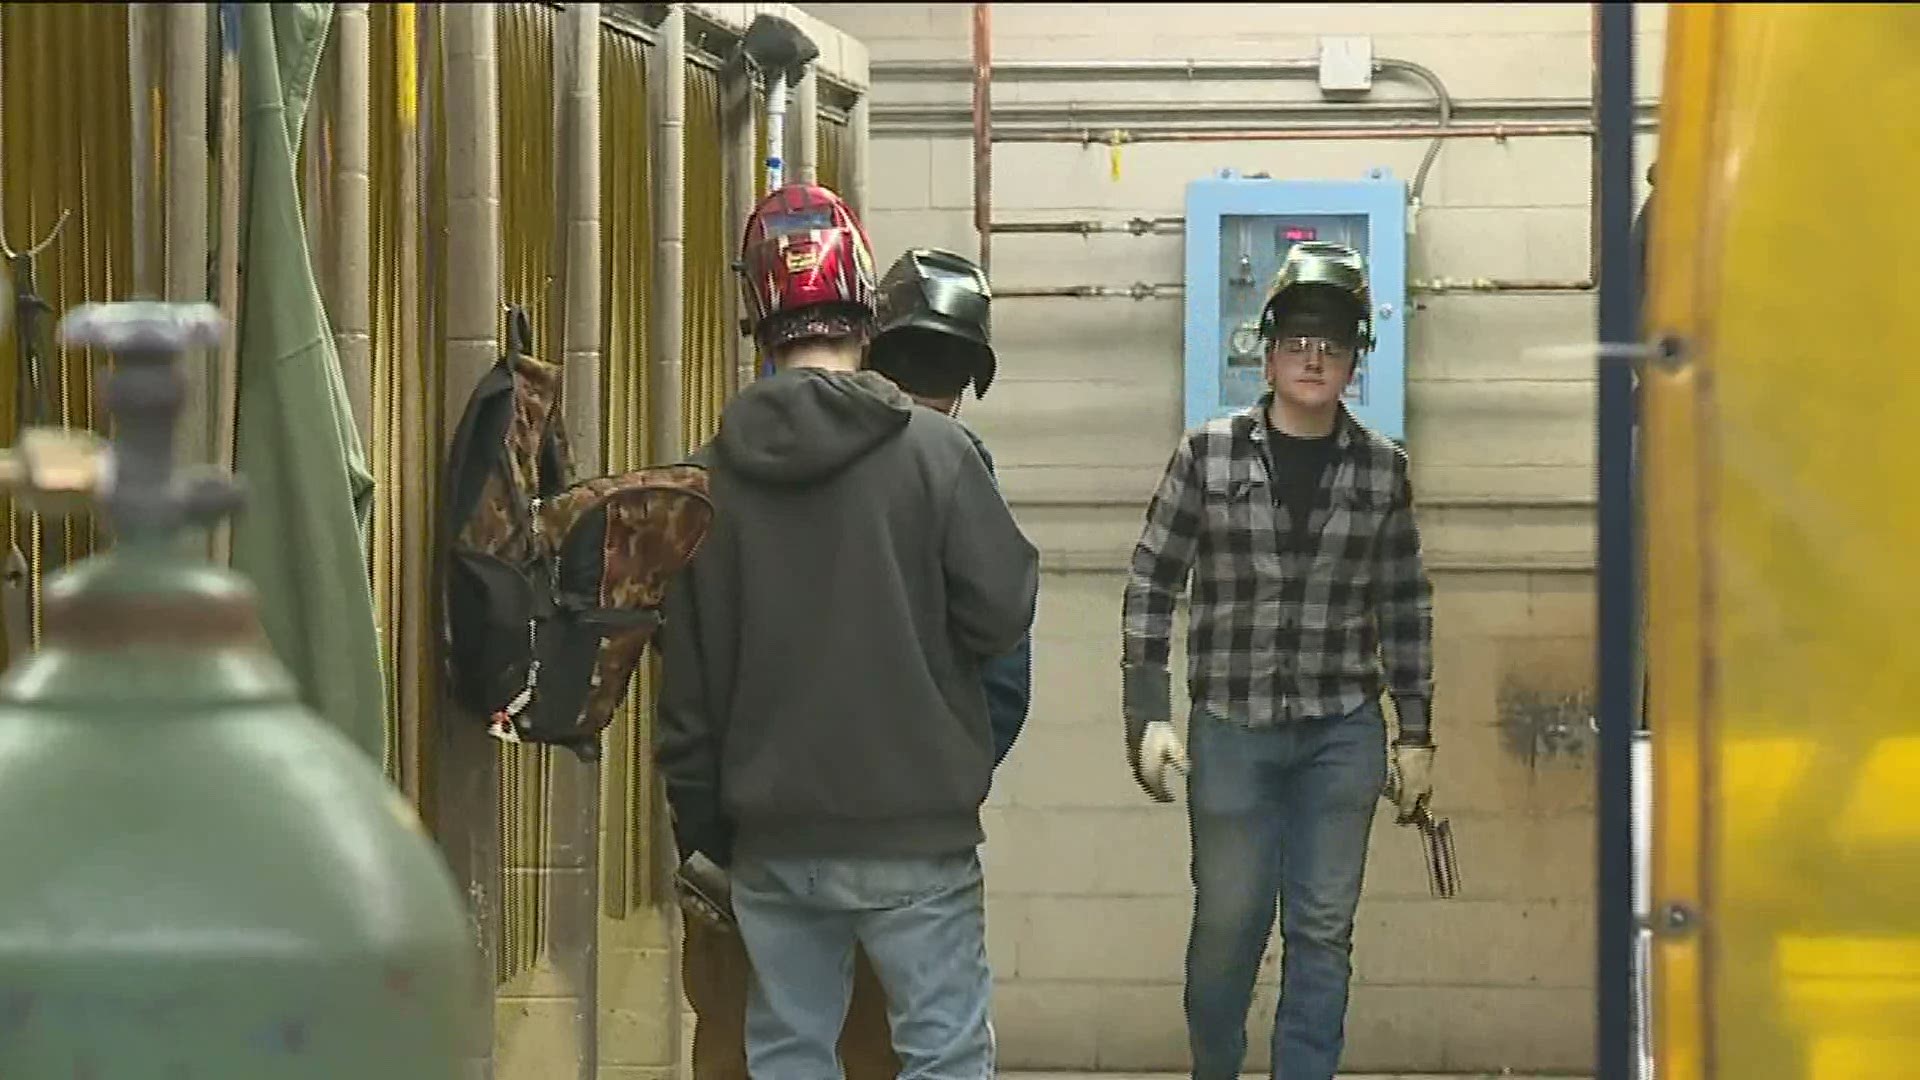 The college in Williamsport is showing off some big upgrades to its welding facility.